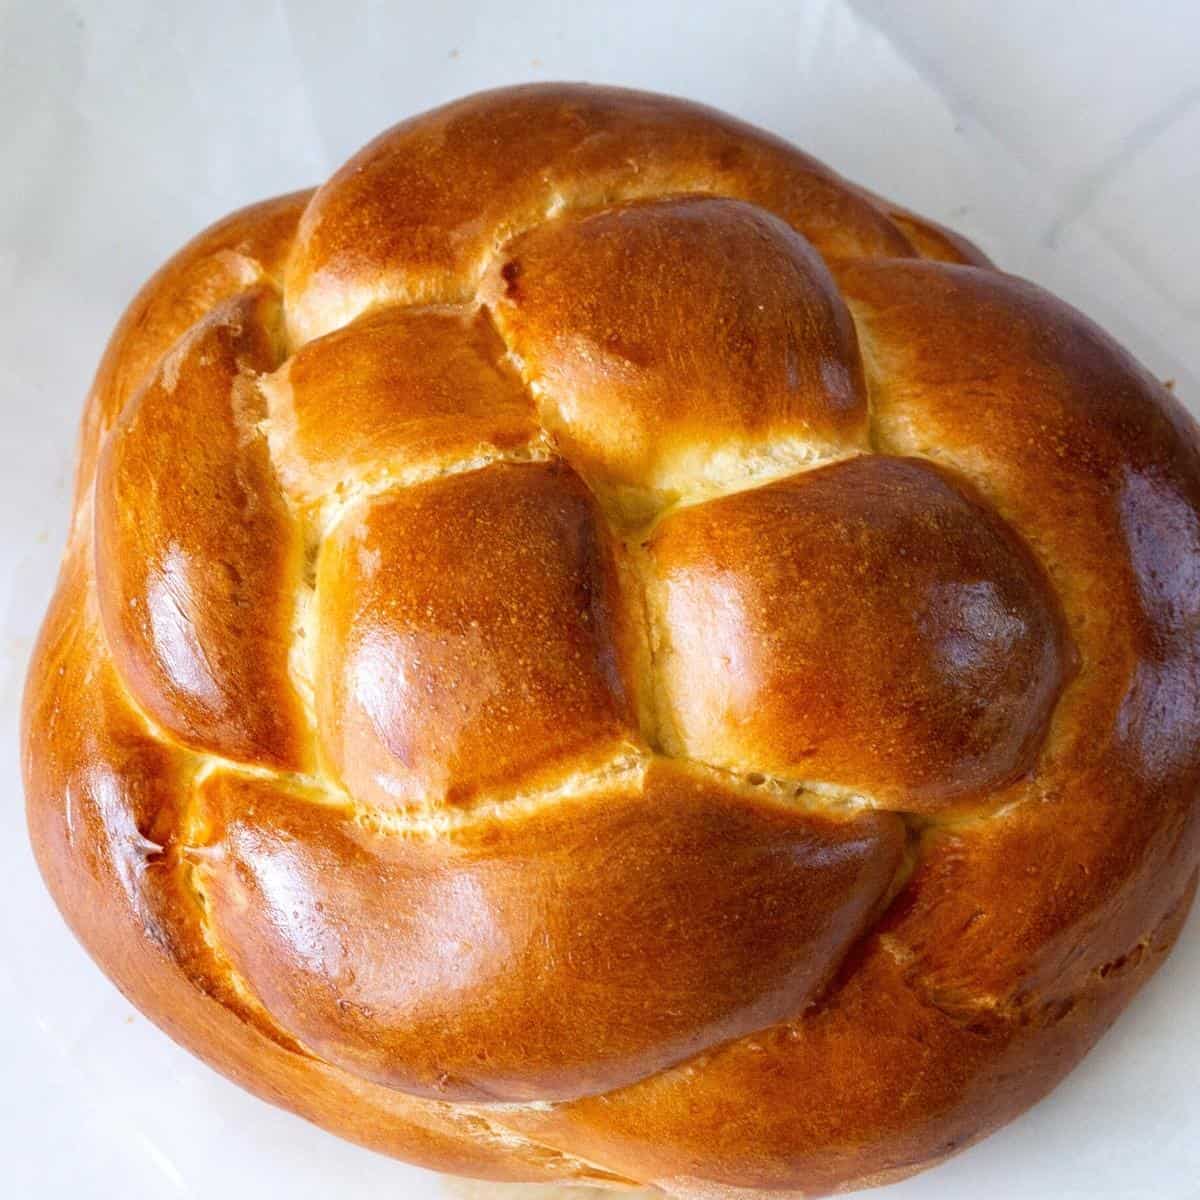 A challah on the table.